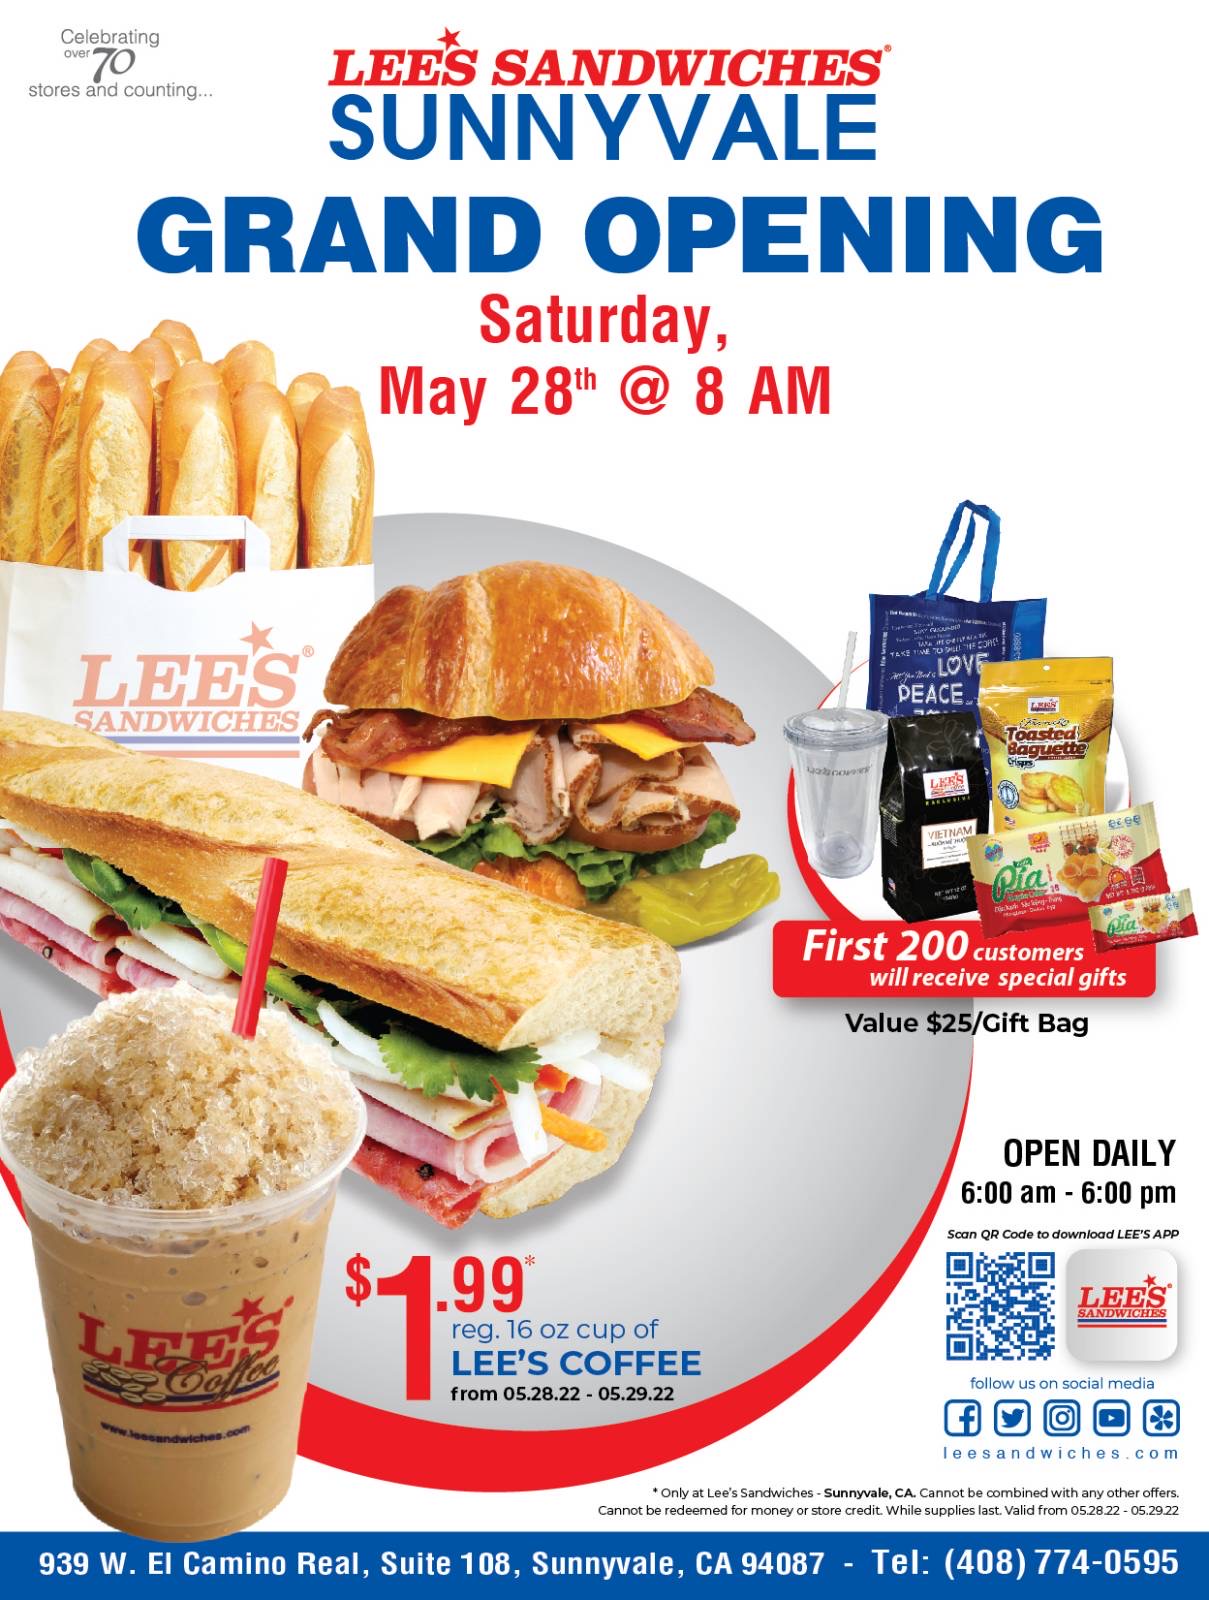 Sunnyvale Grand ReOpening on 05.28.2022 - 200 special gifts & promotion!